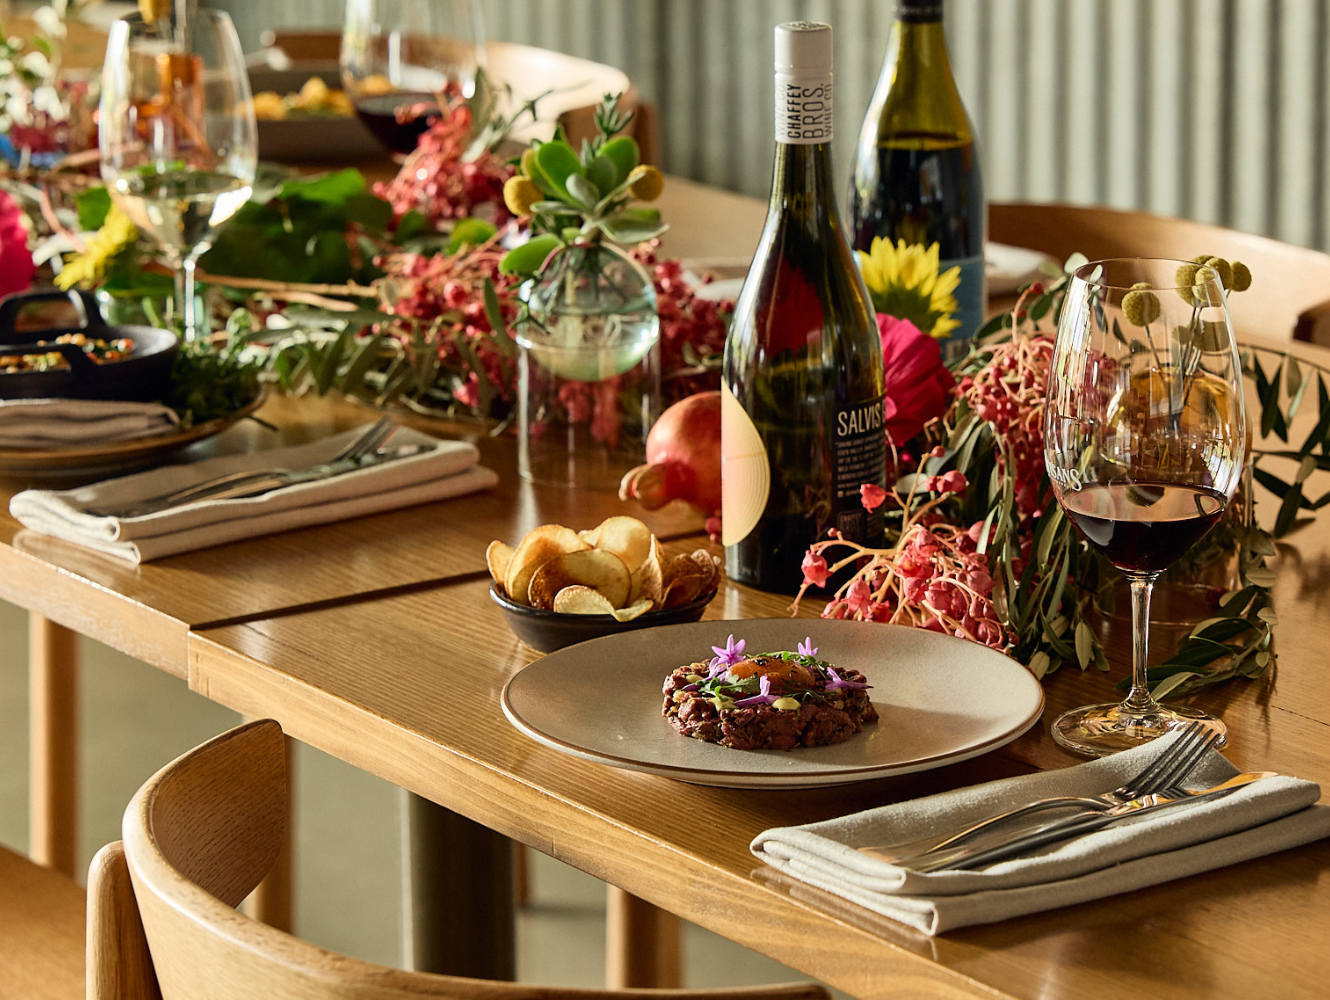 Mother's Day Lunch in Barossa: A Unique Dining Experience at Essen, by Artisans of Barossa